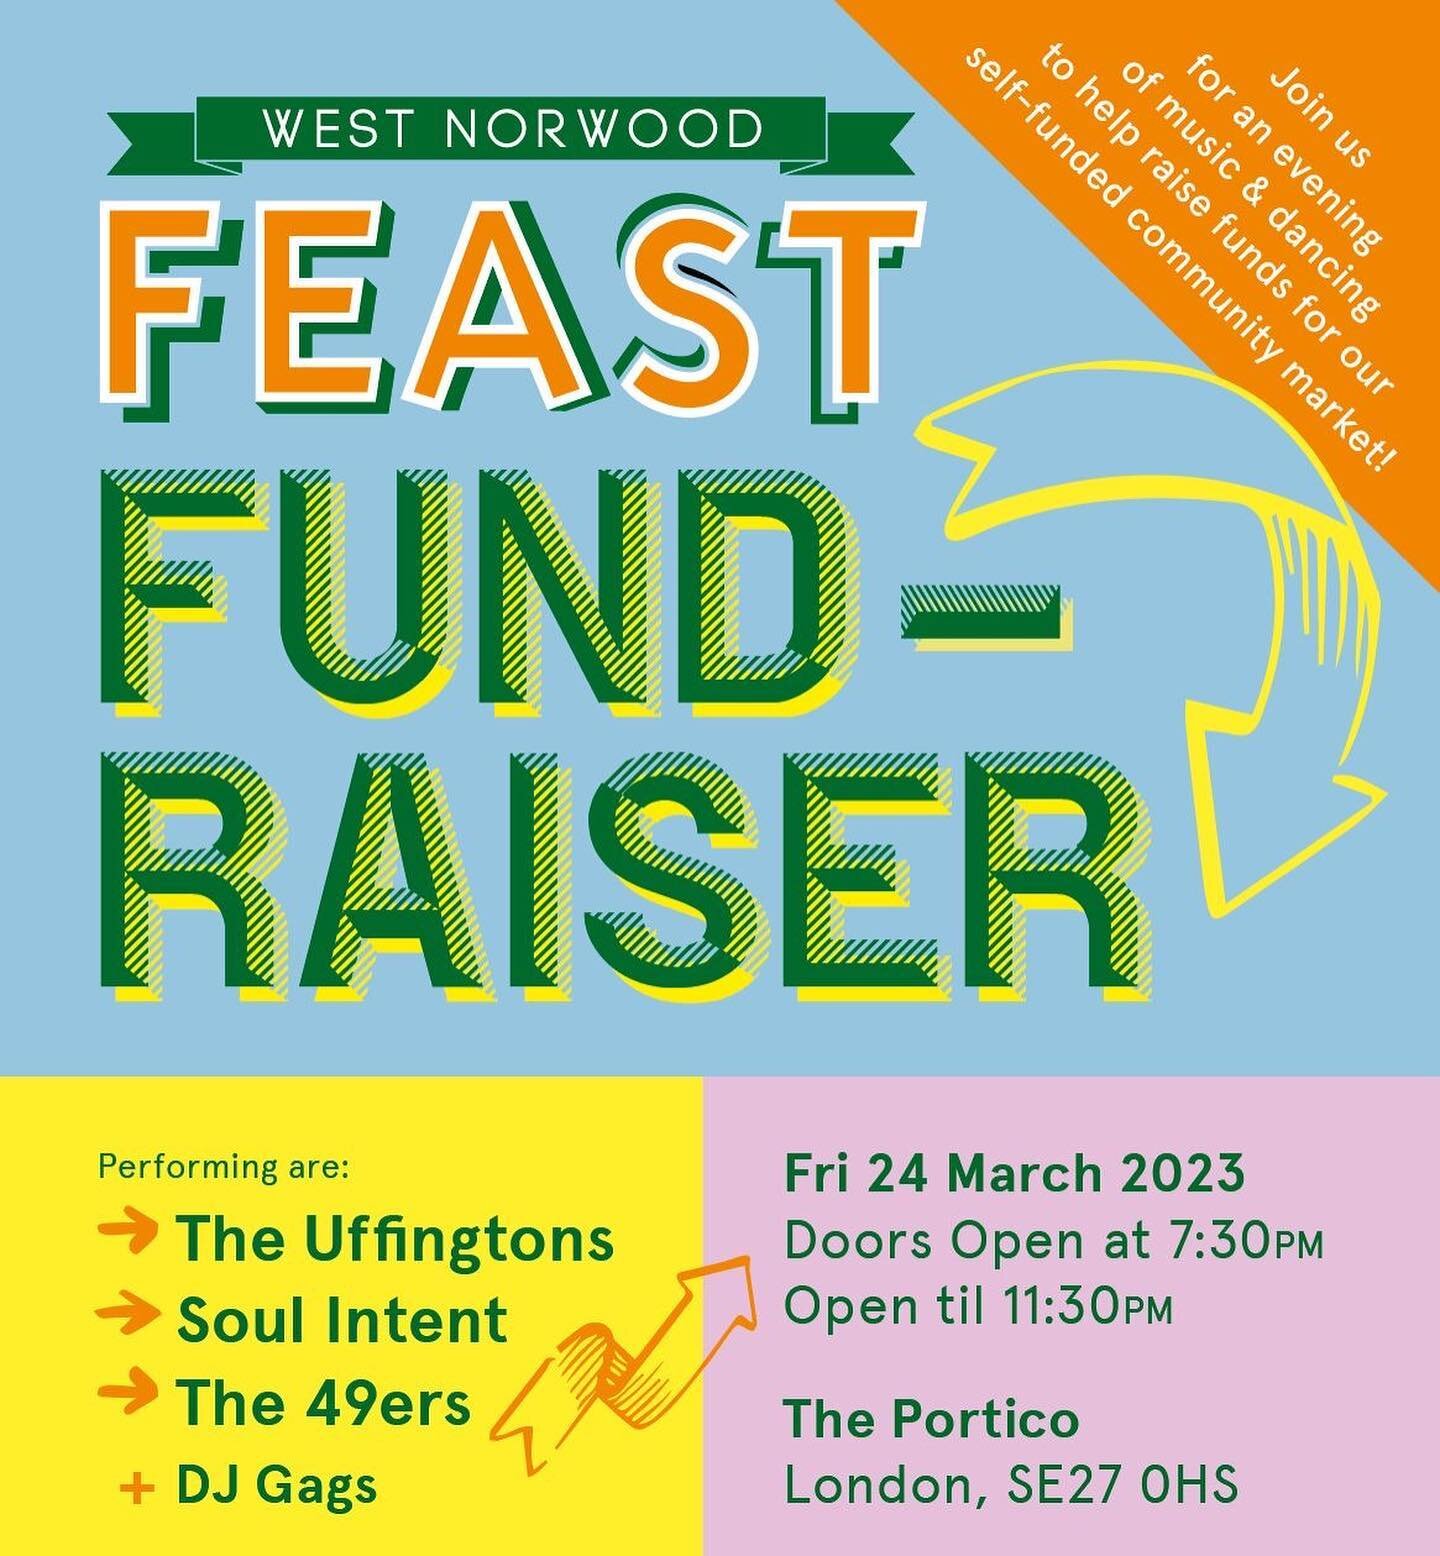 Feast Fundraiser @ The Portico 

24 March 2023 
19:30-23:30 

Live Music, DJs, Drinks &amp; Dancing 💃🏽🪩

All money from tickets goes towards supporting West Norwood Feast Community Market @wn_feast 

&pound;12 Advanced Ticket 
&pound;15 On the doo